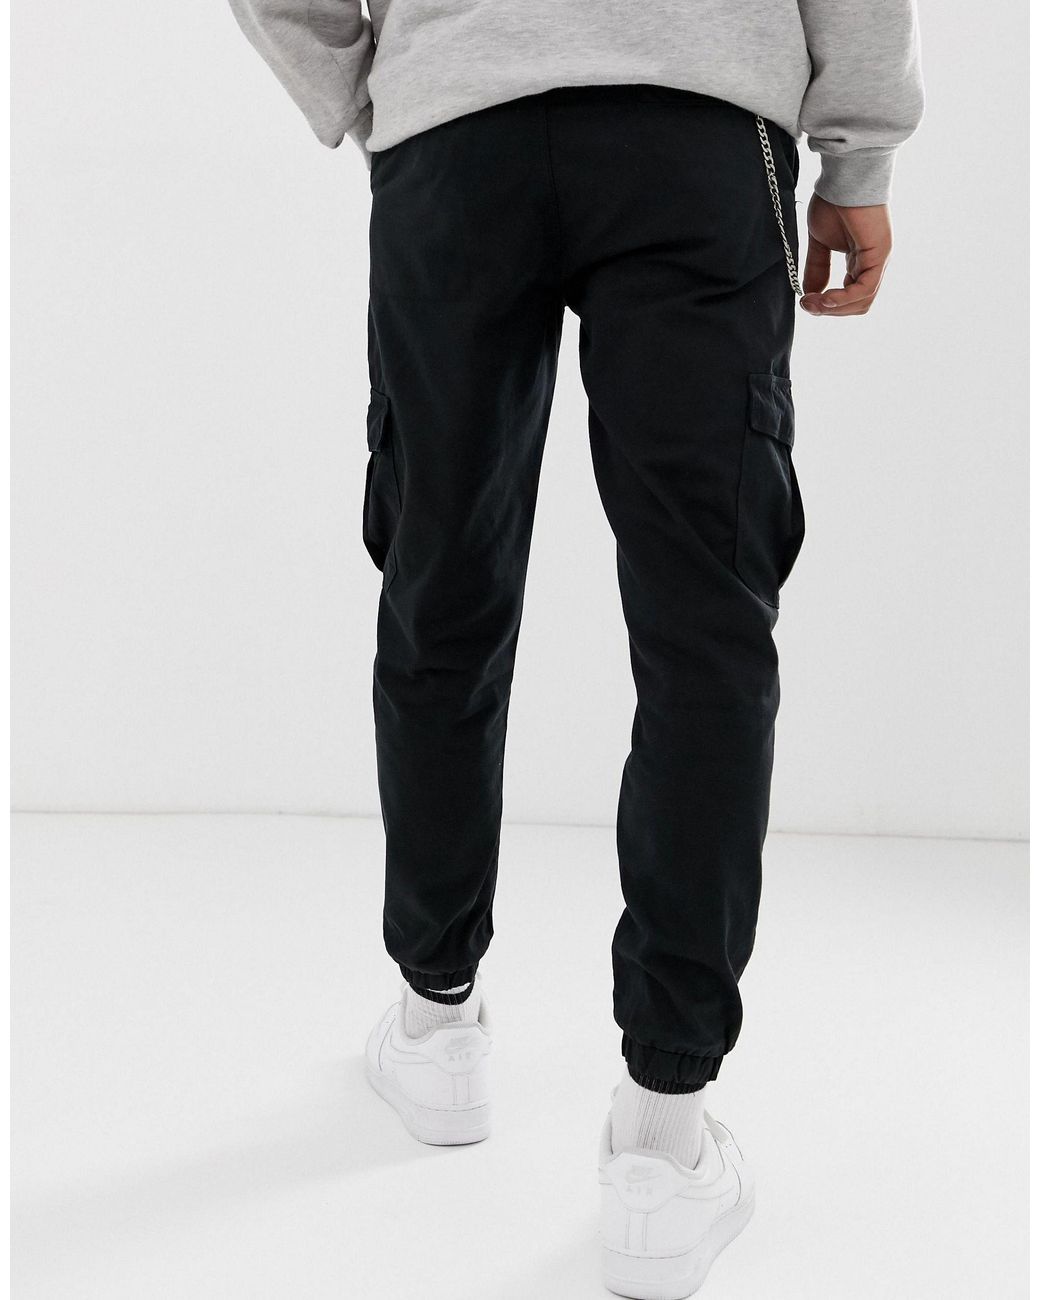 Cargo Pants with Chains Pocket  Pants for women White wide leg pants Black  cargo pants